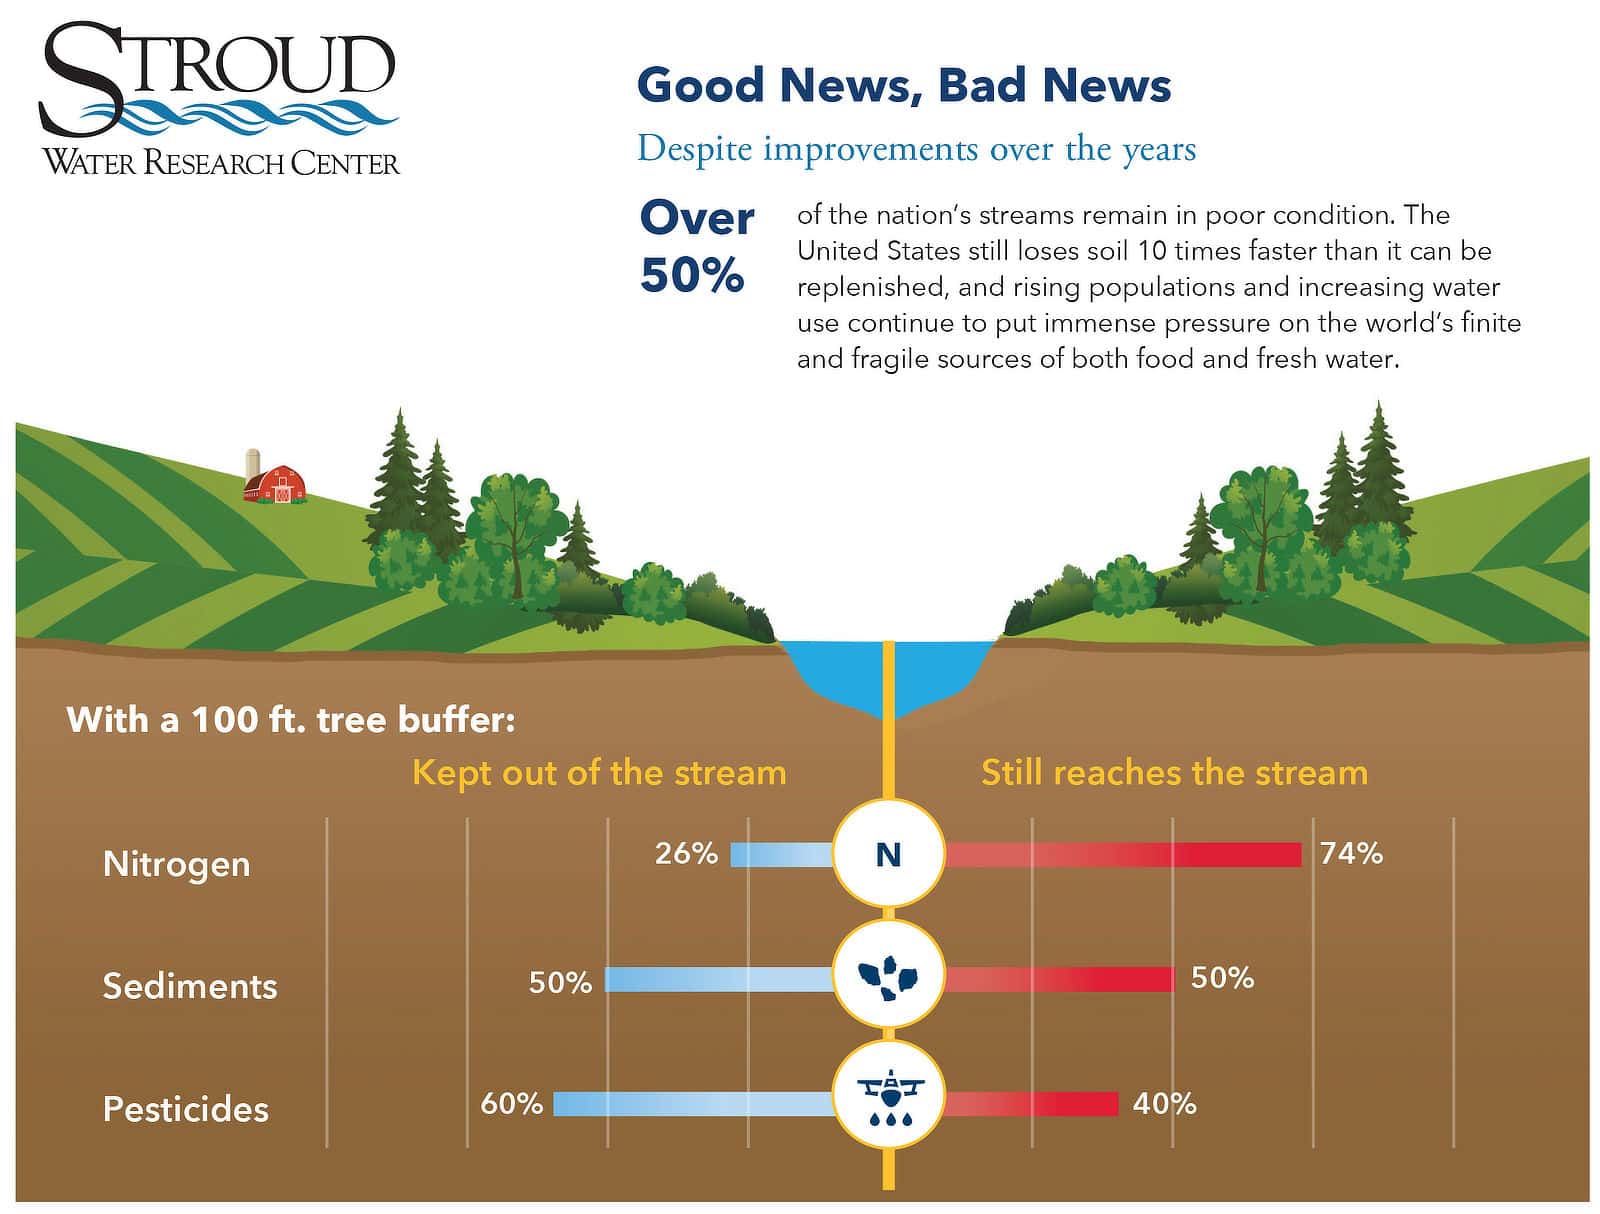 Graphic showing what percentage of nitrogen, sediments, and pesticides are kept out of a stream by a 100-foot tree buffer